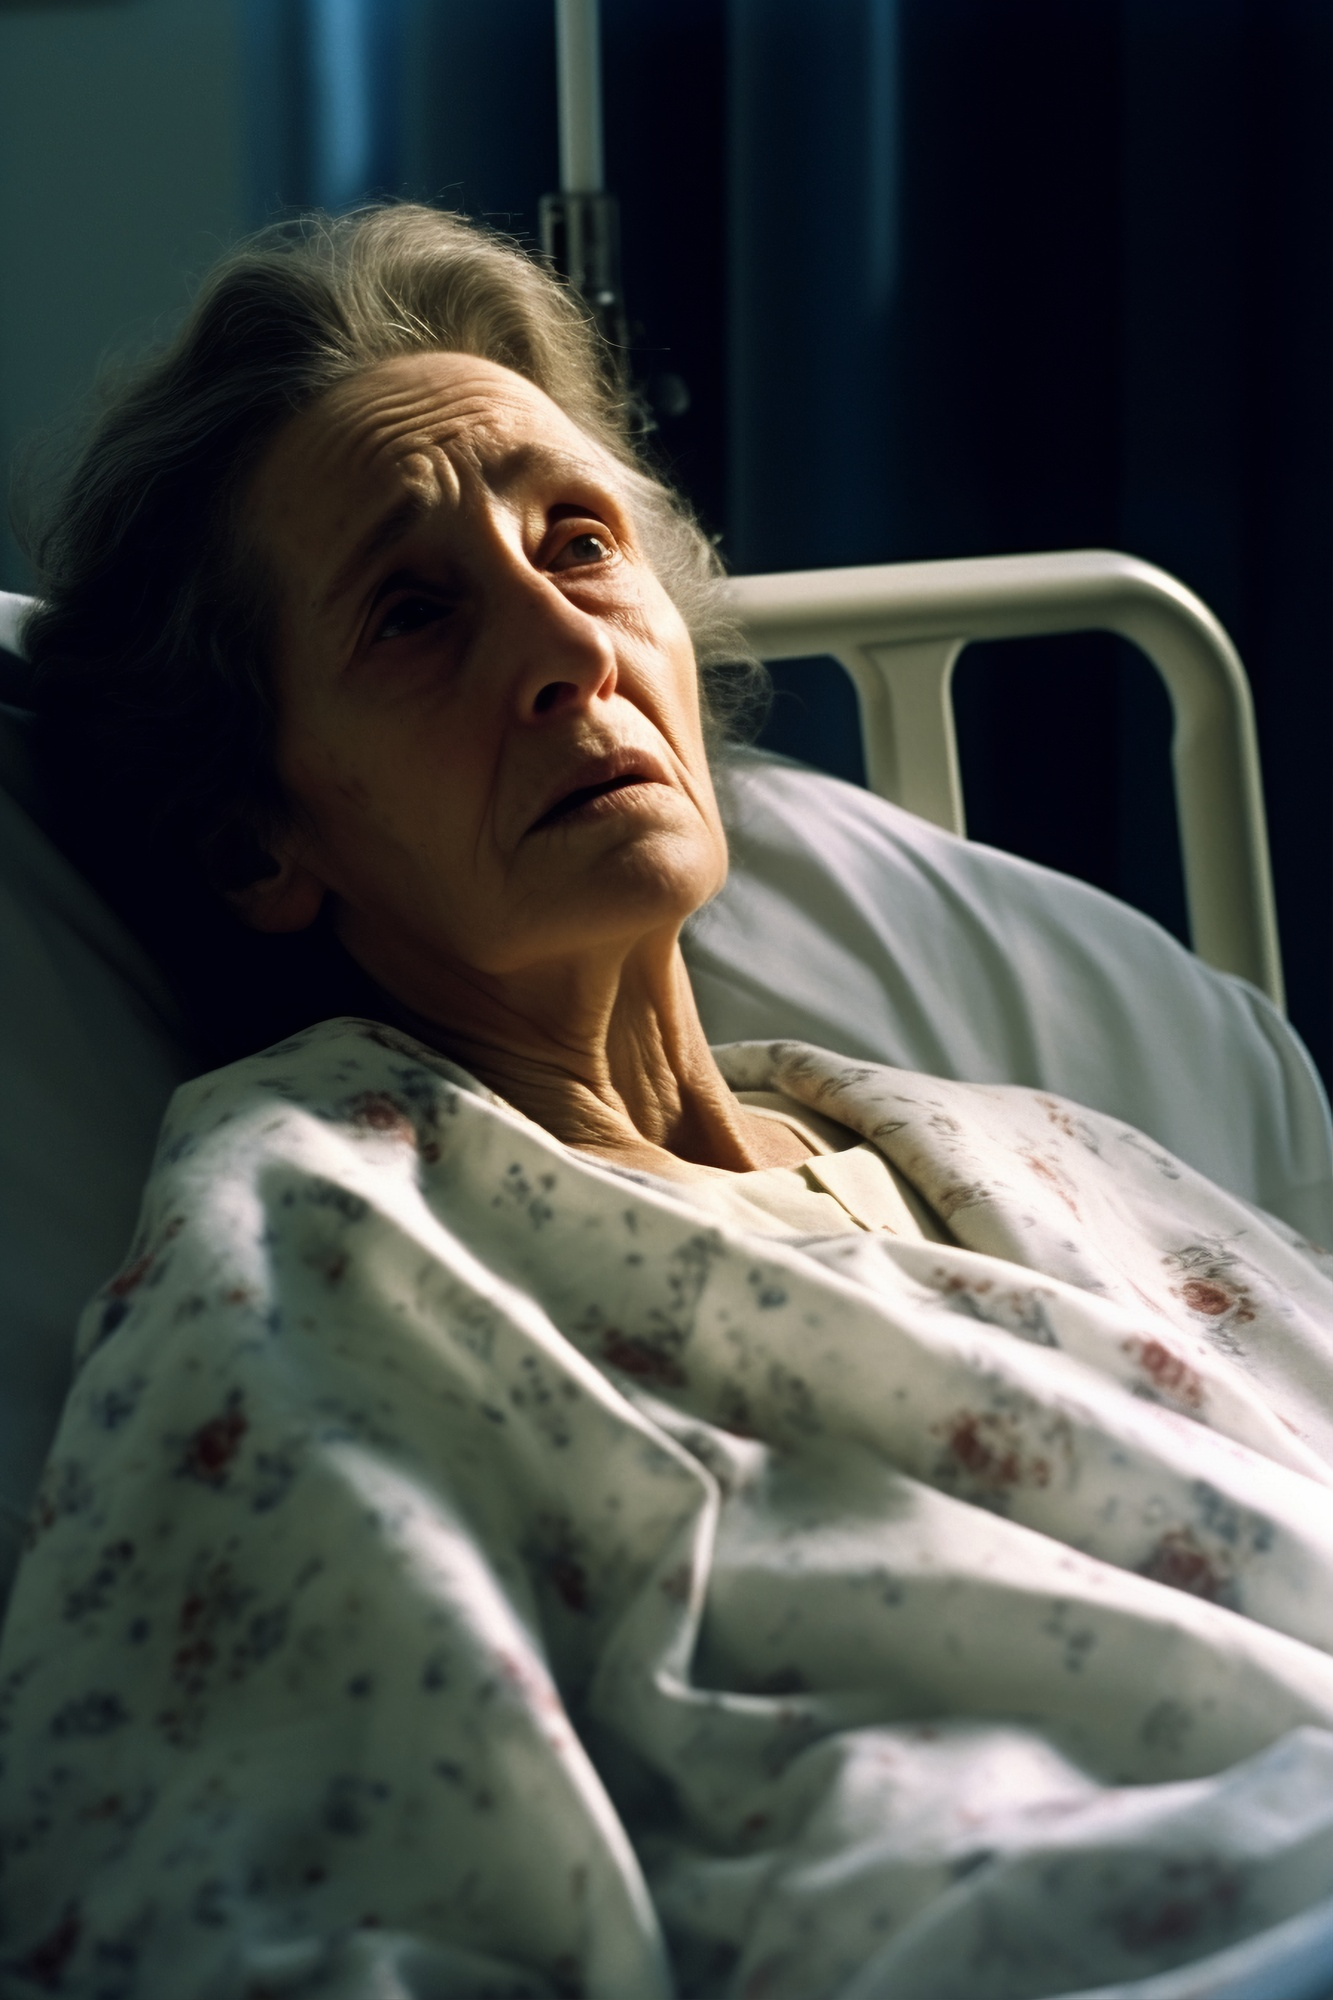 A sick older woman in a hospital bed | Source: Freepik